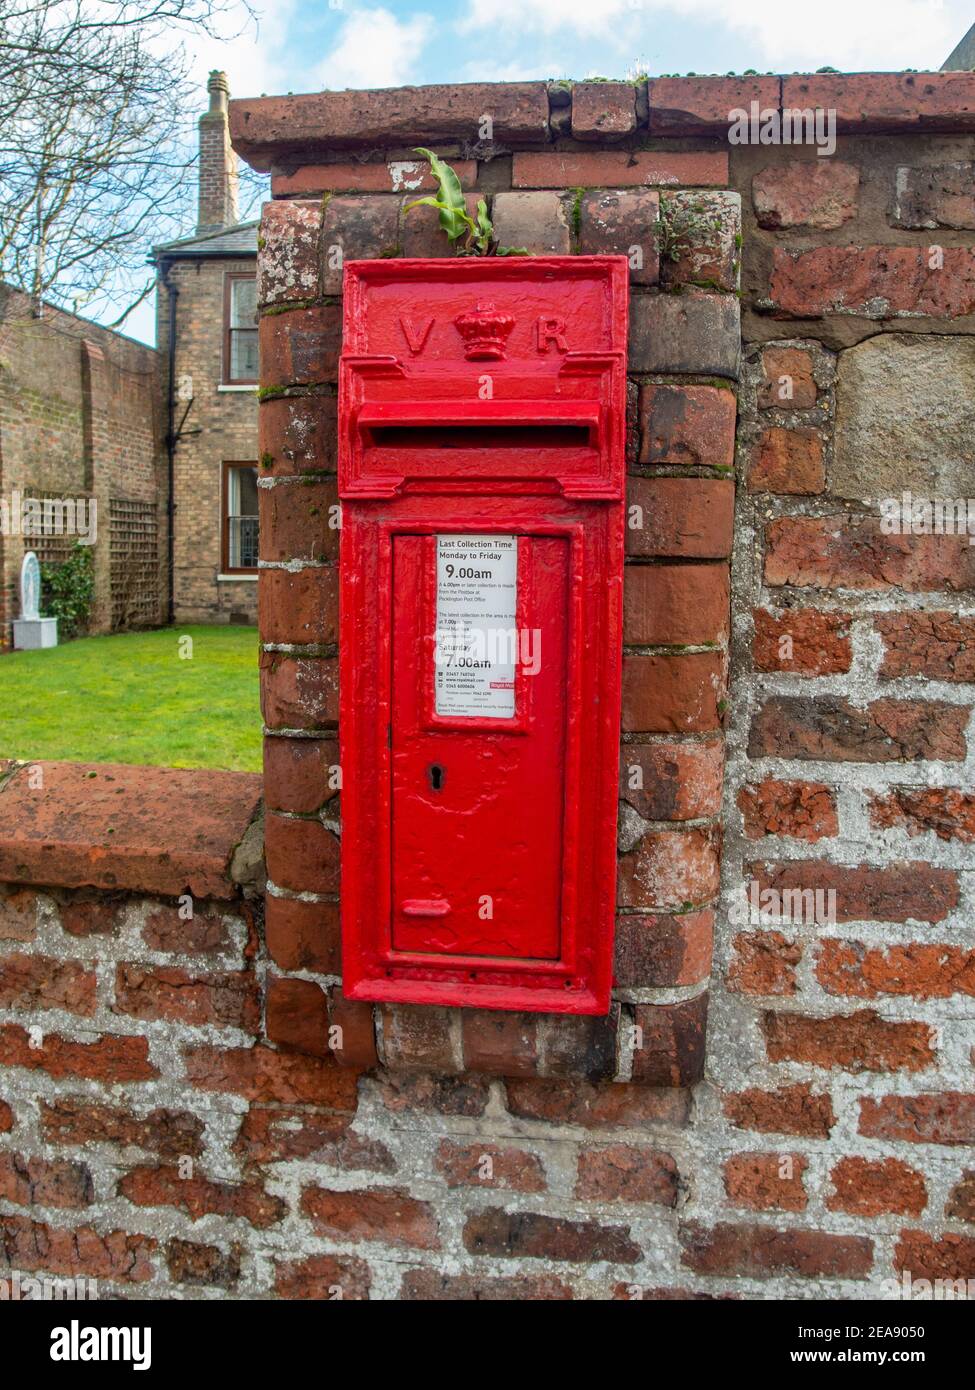 Pocklington, East Yorkshire, UK 12/01/2020 - Old victorian red post box built into a brick wall Stock Photo